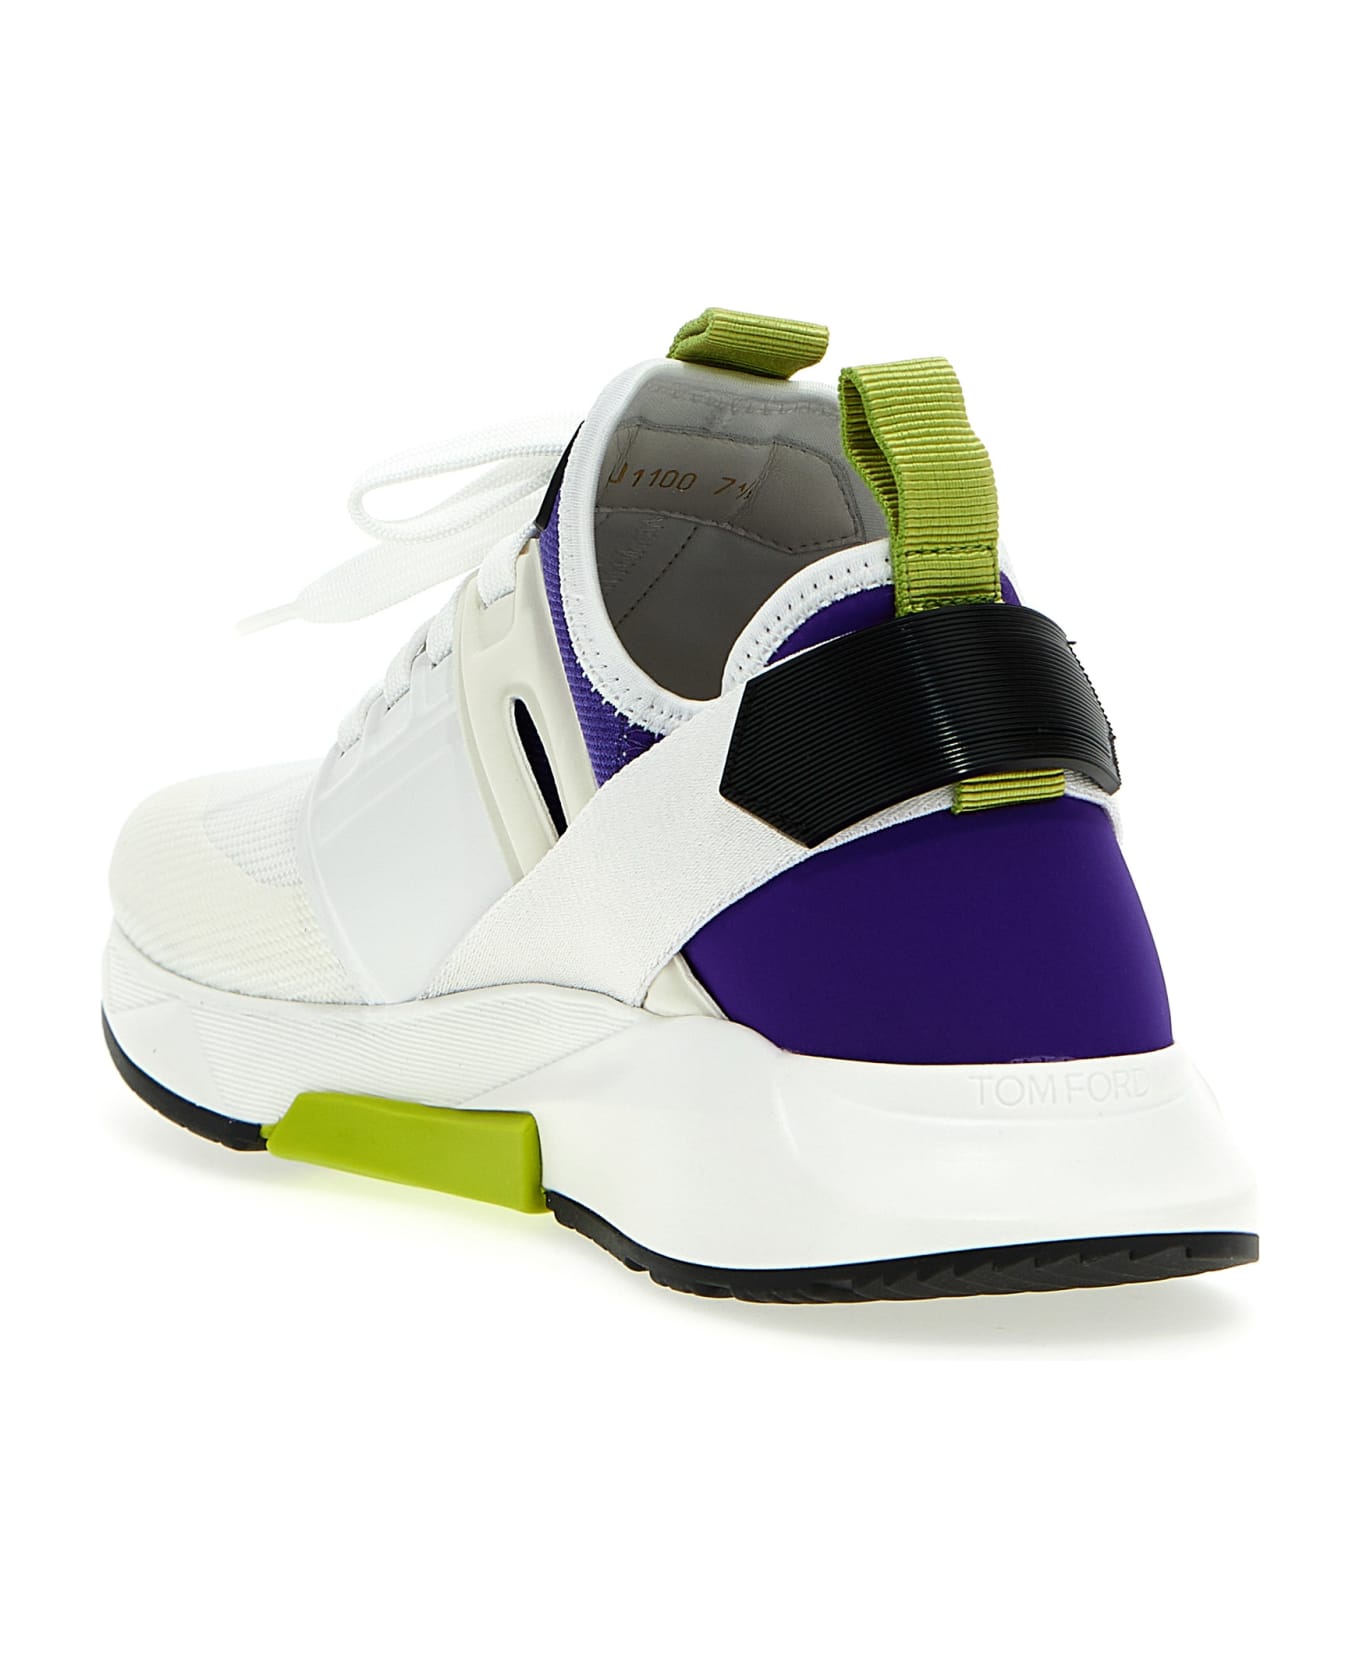 Tom Ford Low Sneakers - White